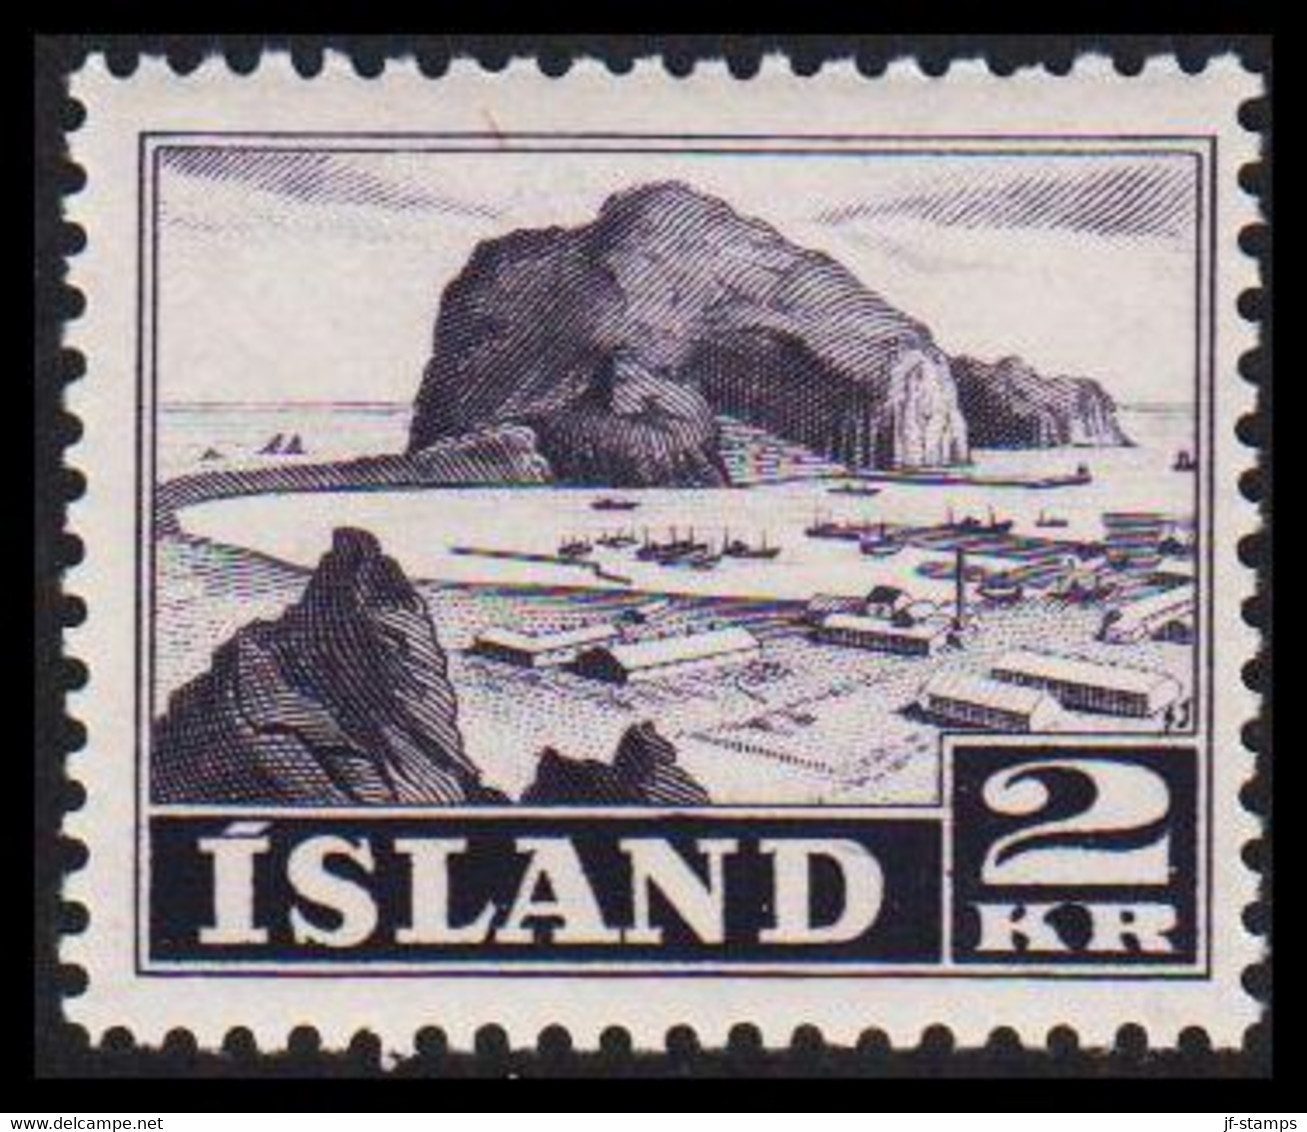 1950. ISLAND. Work And Views. 2 Kr. Never Hinged.  (Michel 269) - JF529693 - Unused Stamps